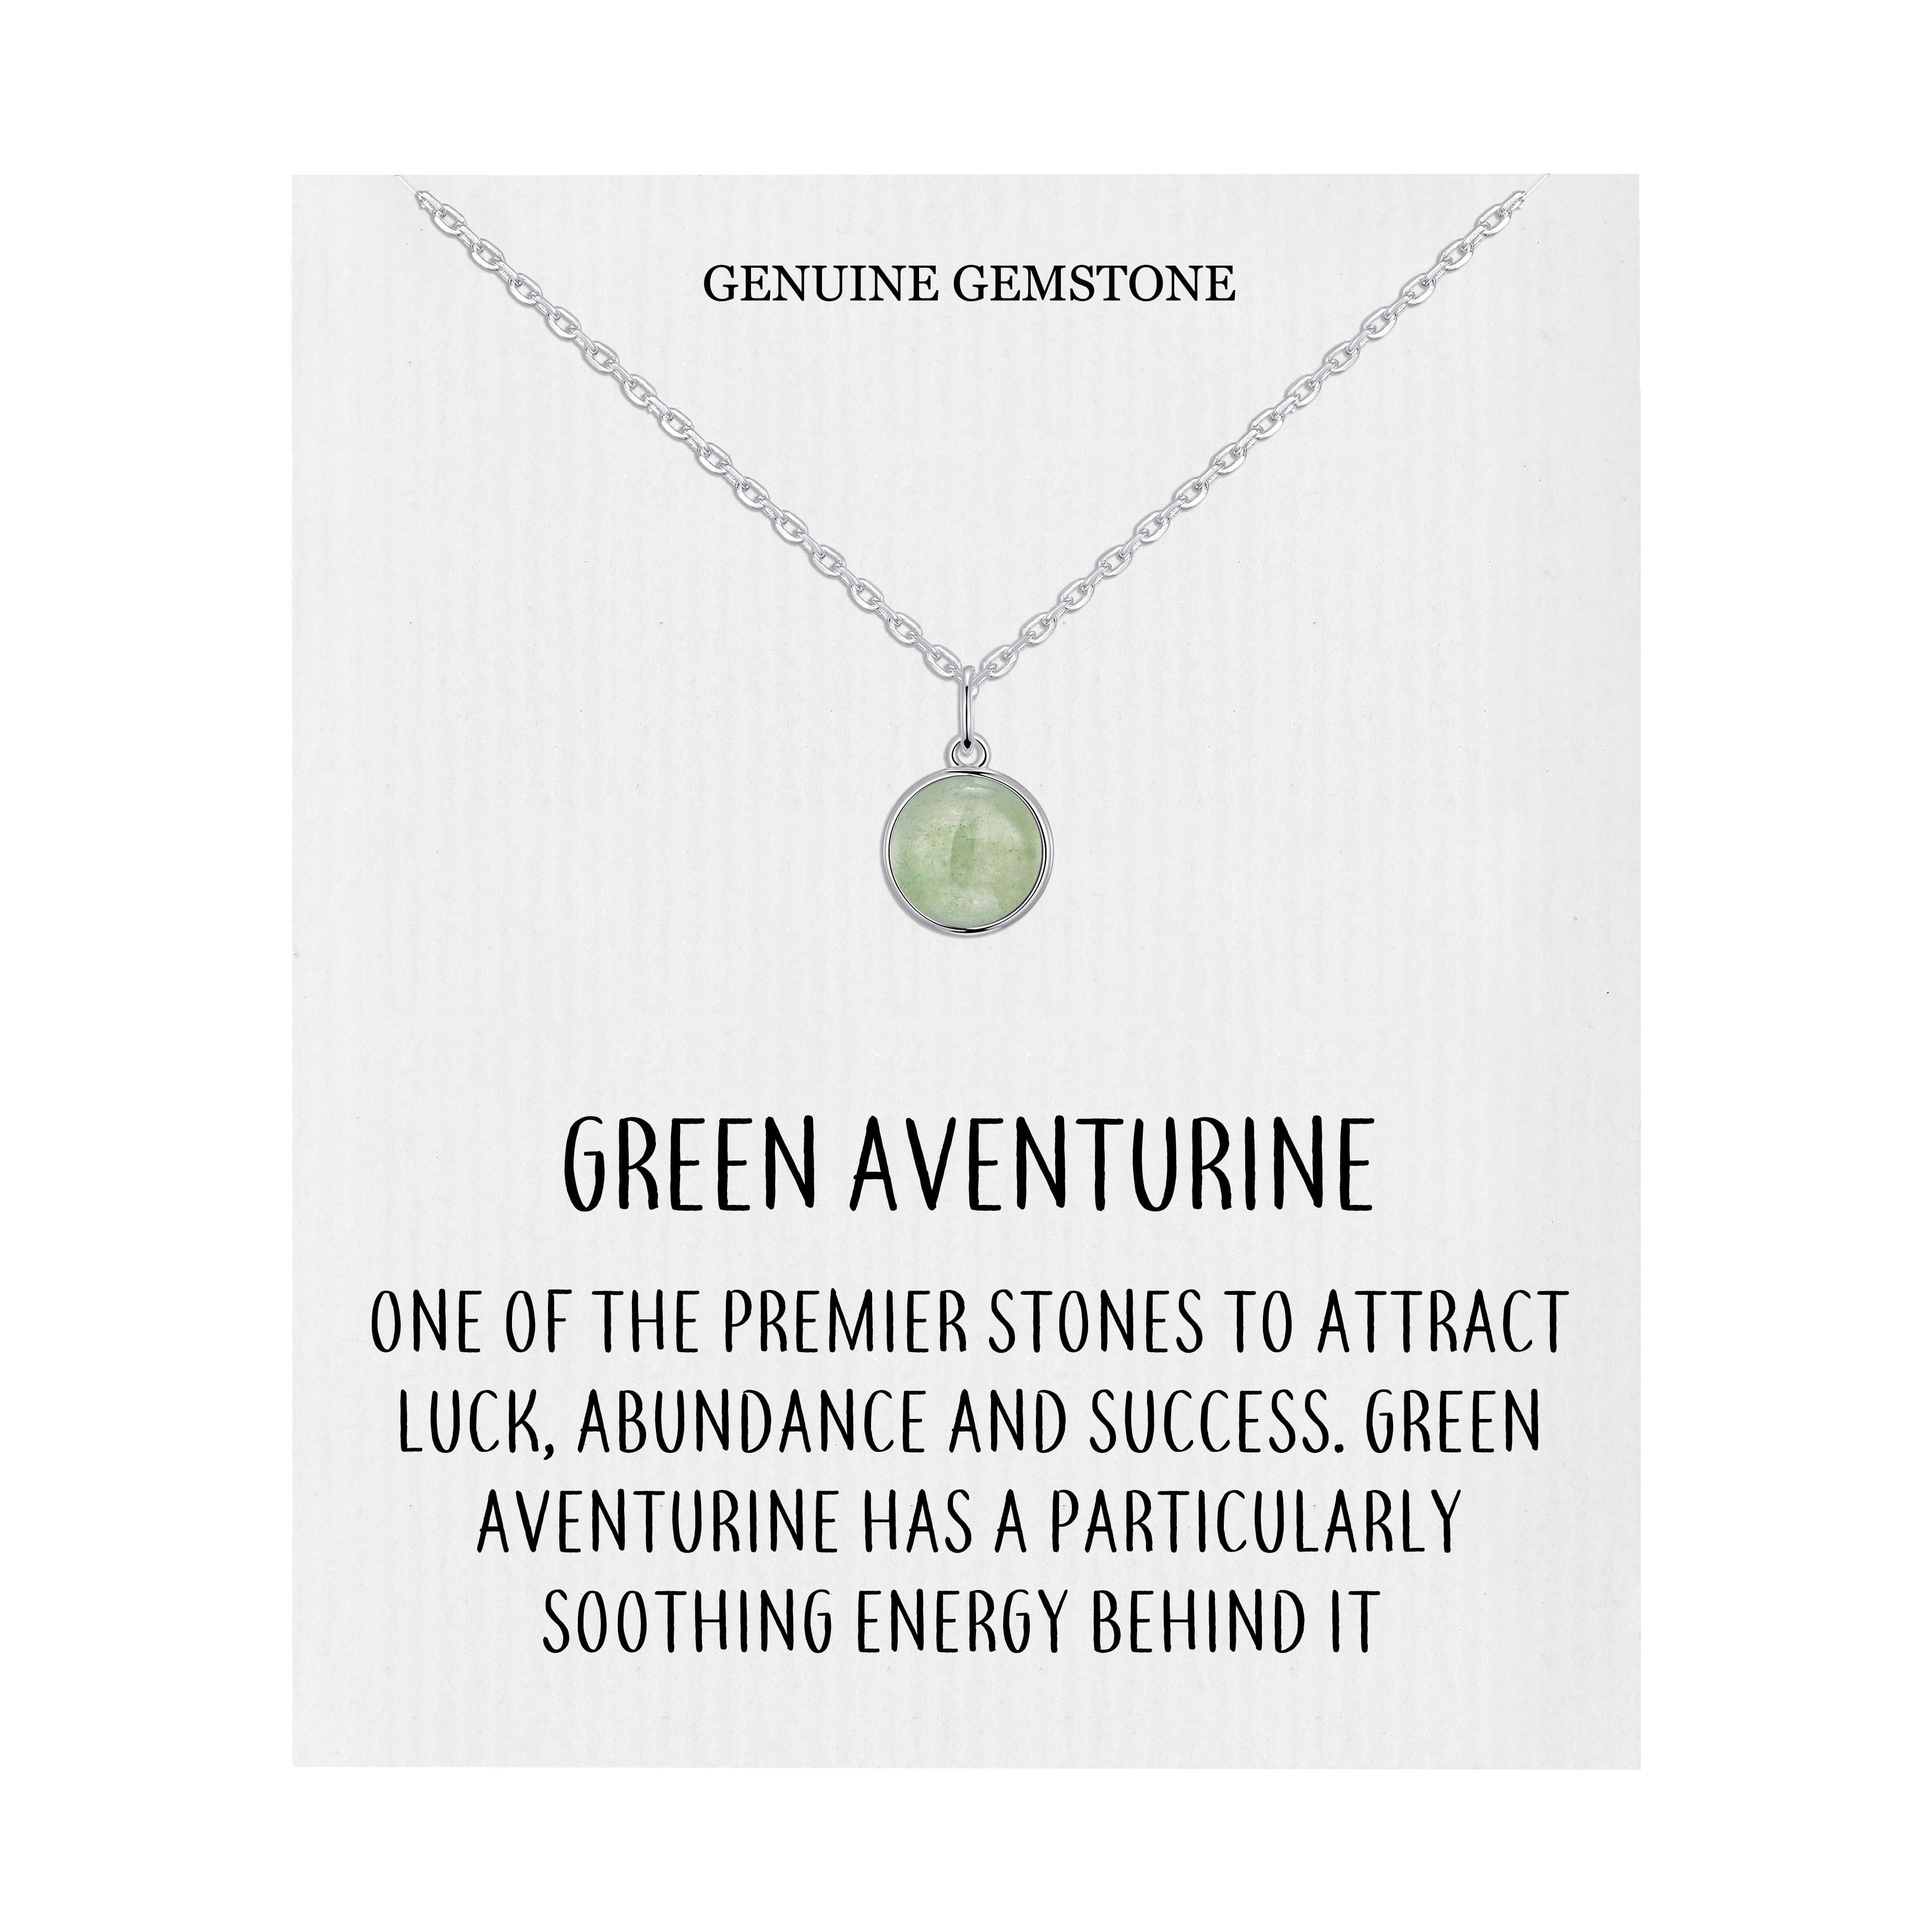 Green Aventurine Necklace with Quote Card by Philip Jones Jewellery